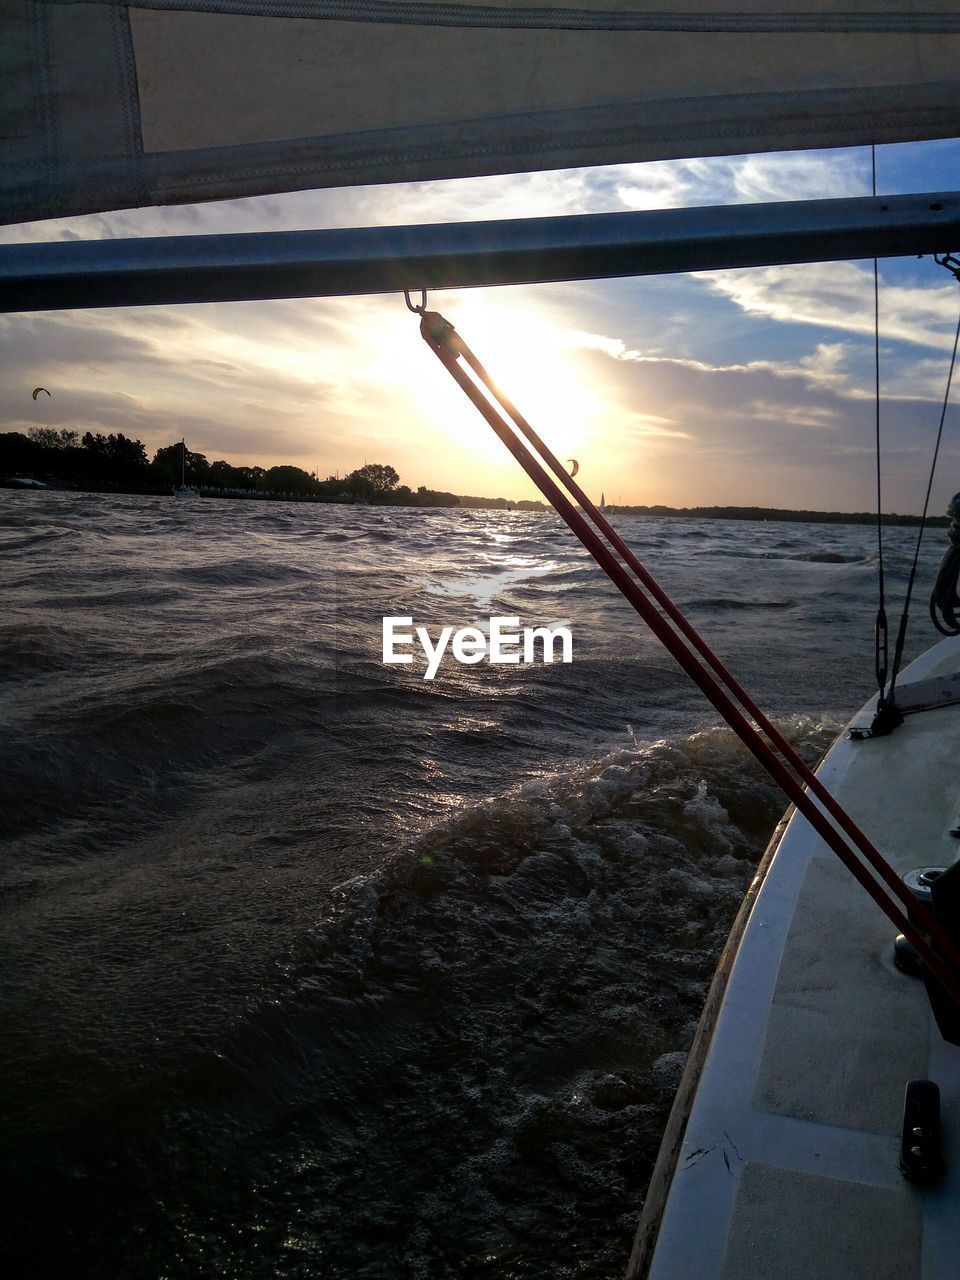 SCENIC VIEW OF SEA SEEN THROUGH BOAT